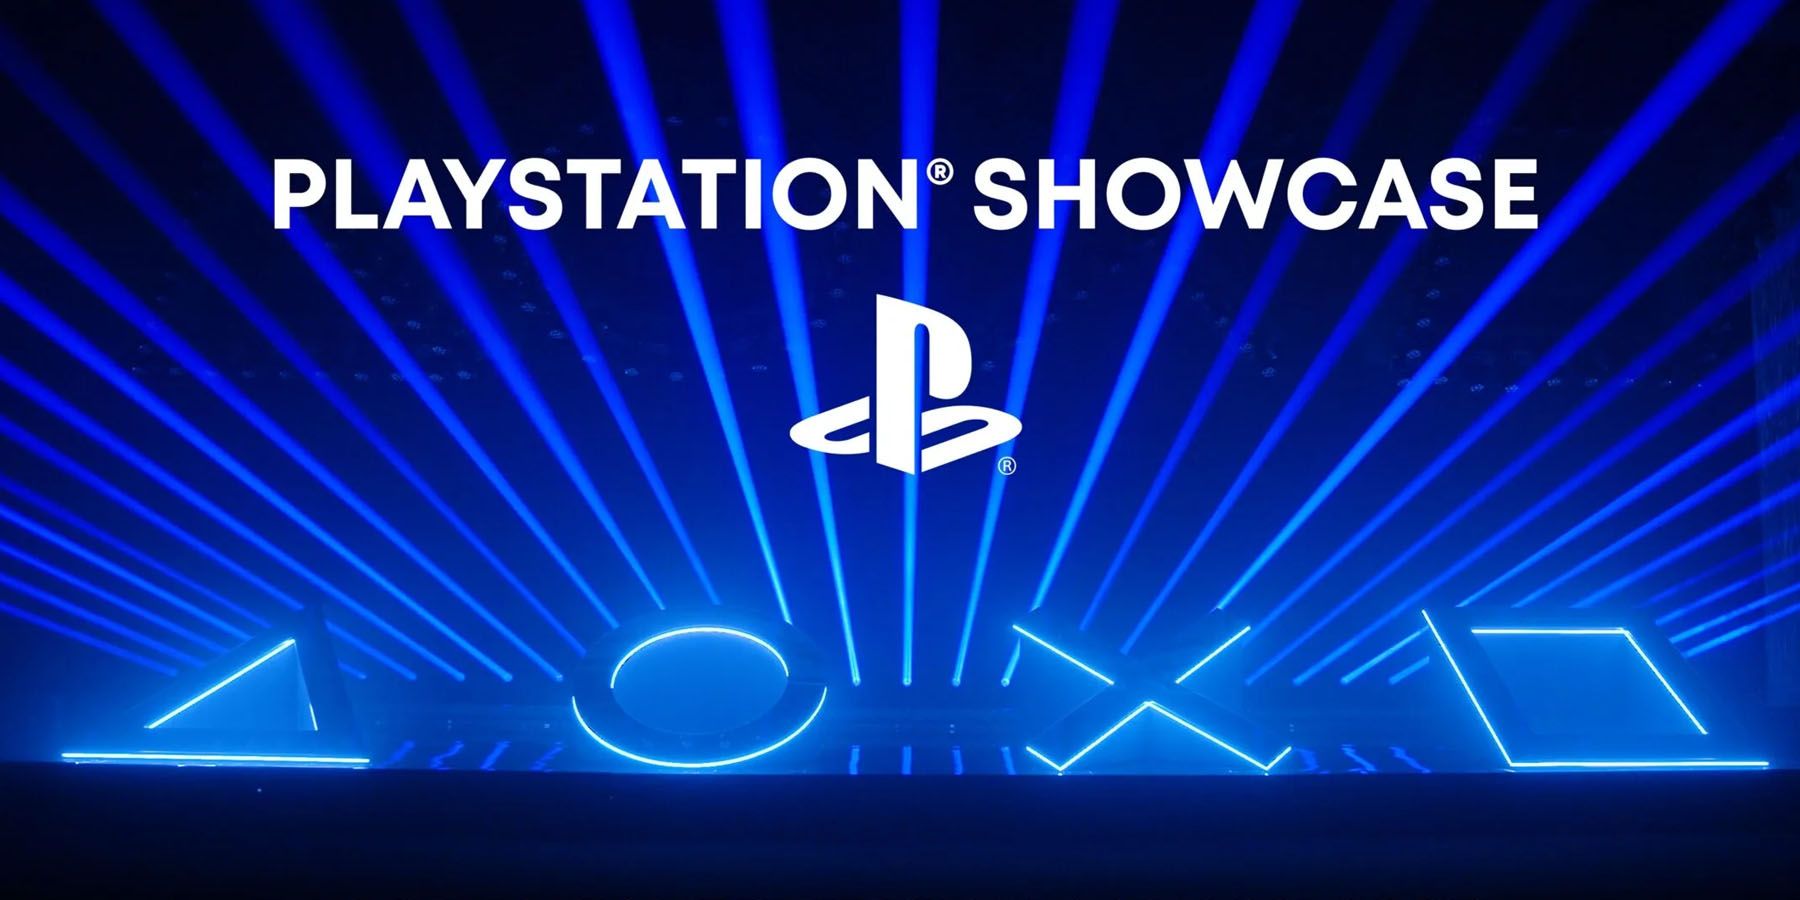 A promotional image for the upcoming PlayStation Showcase, featuring the words 